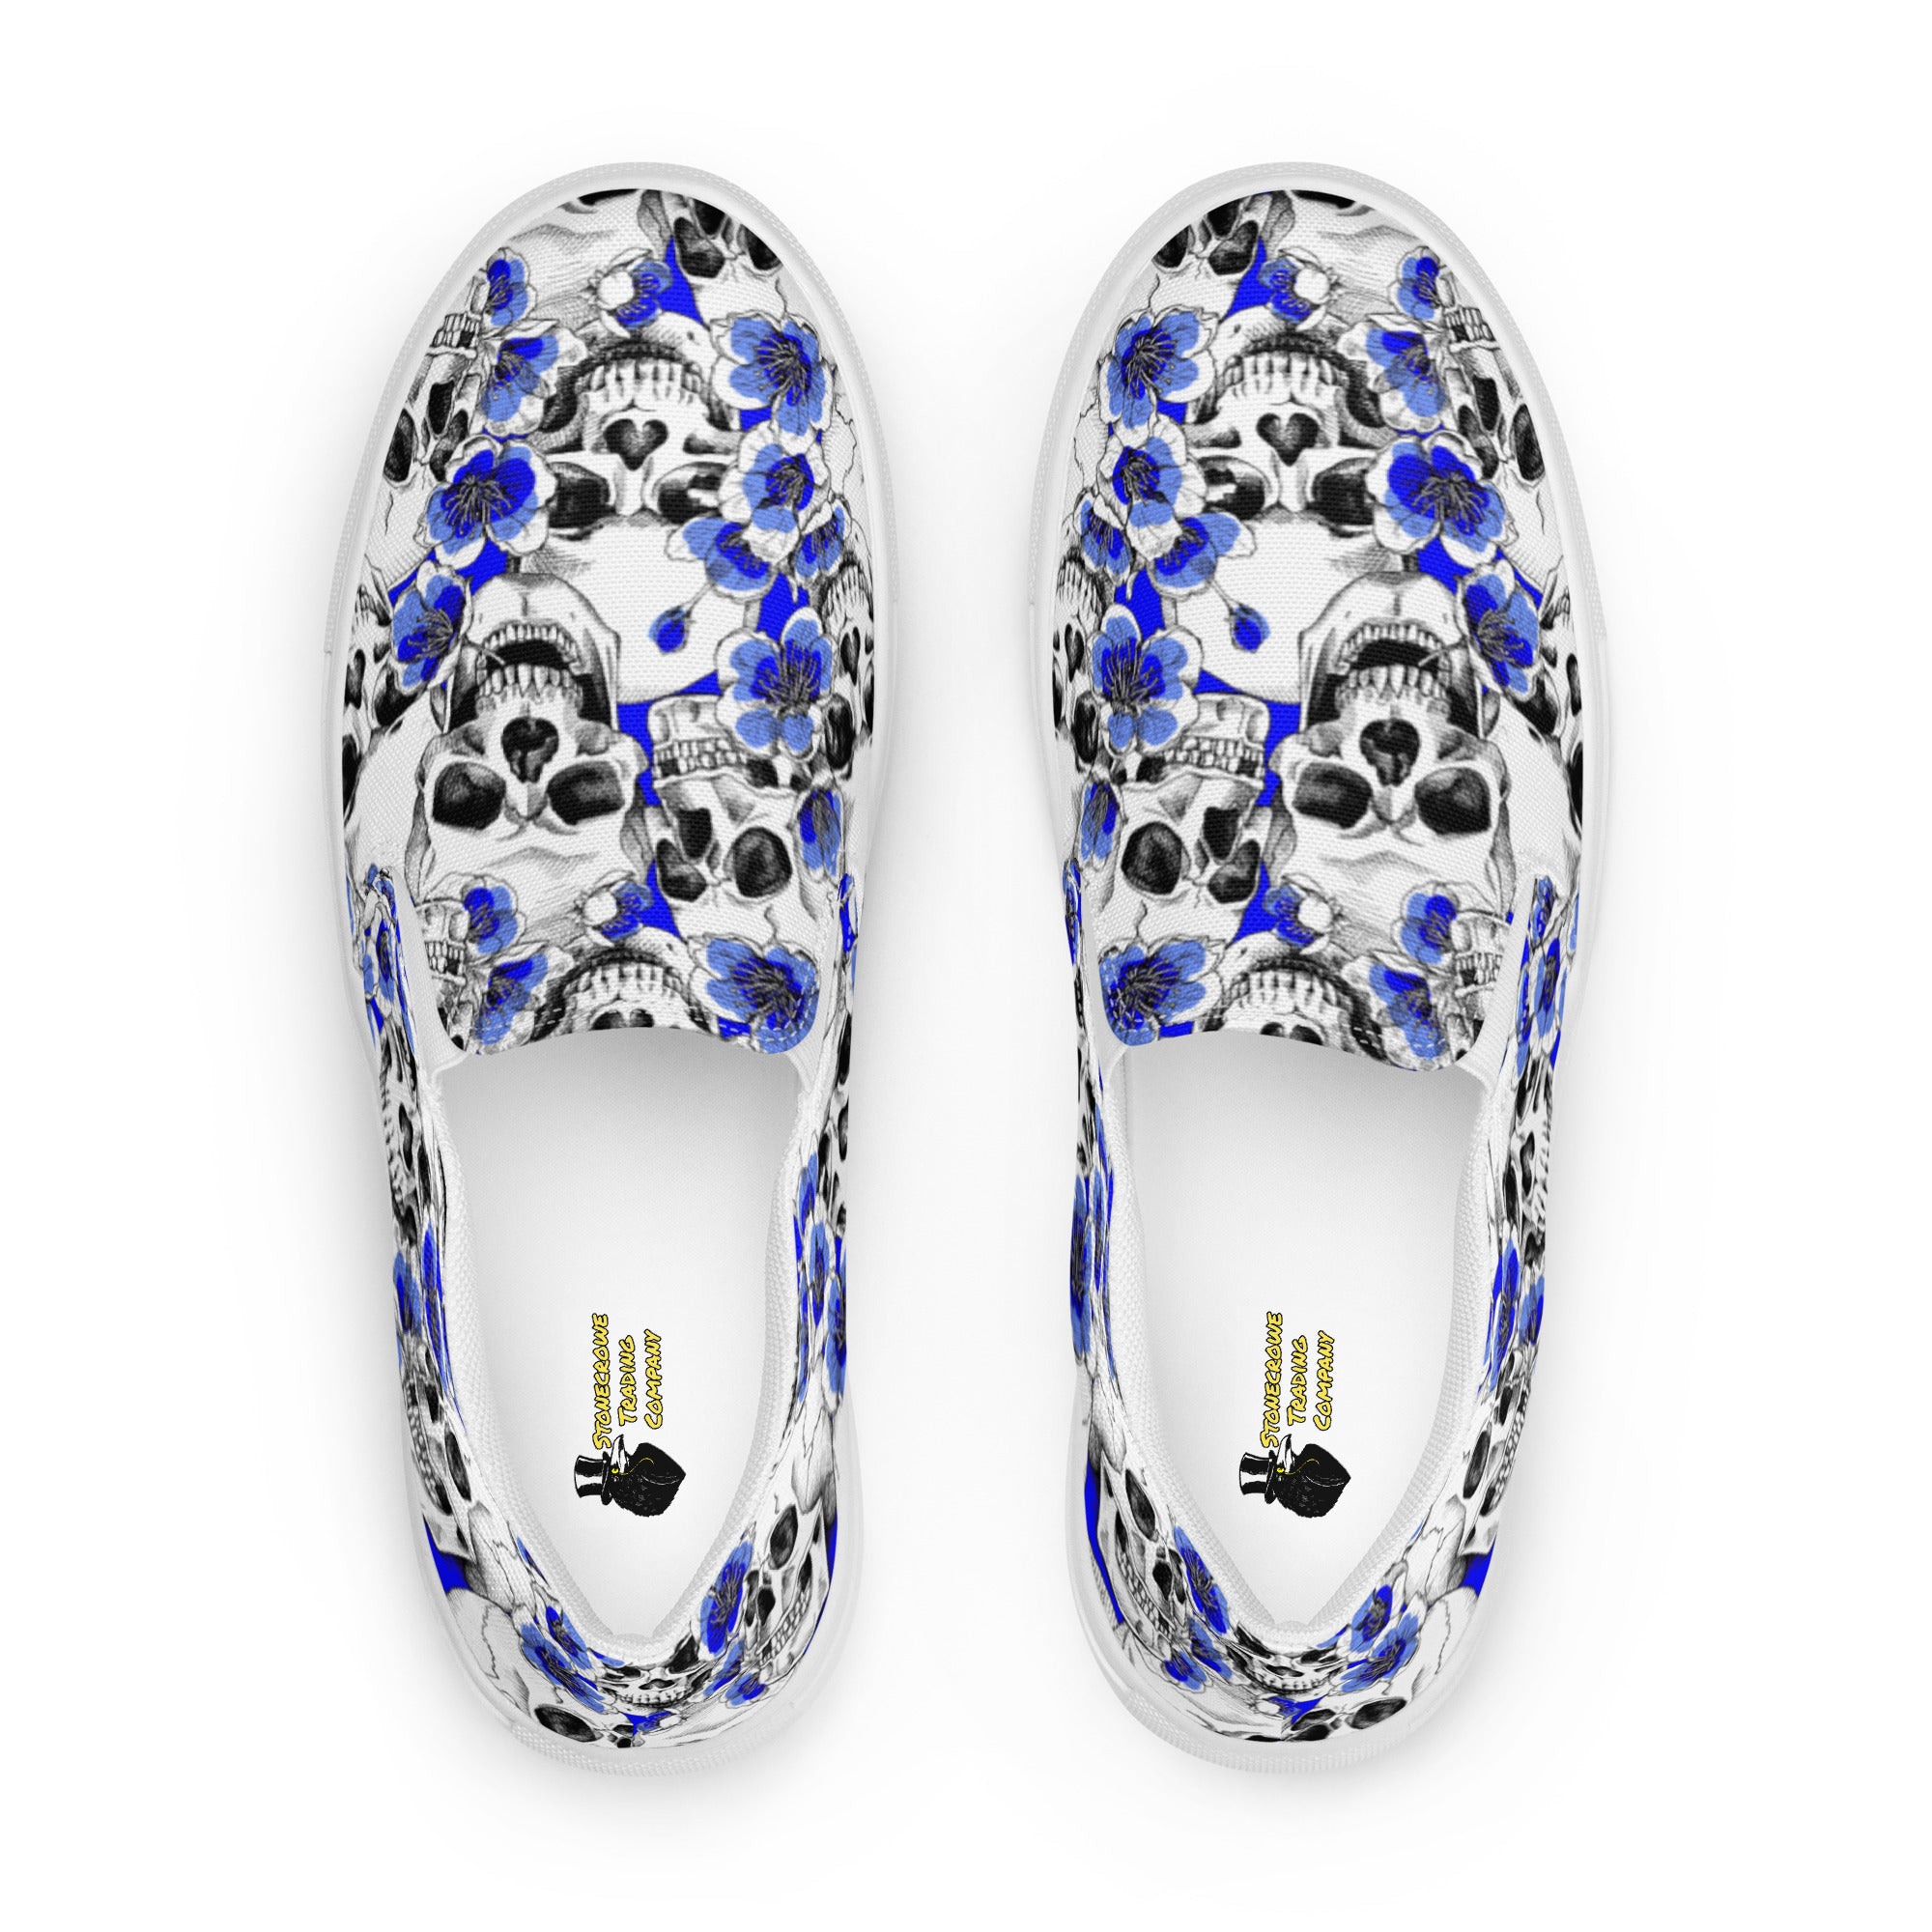 Skulls and Blue Blossoms Men’s Slip-on Canvas Shoes